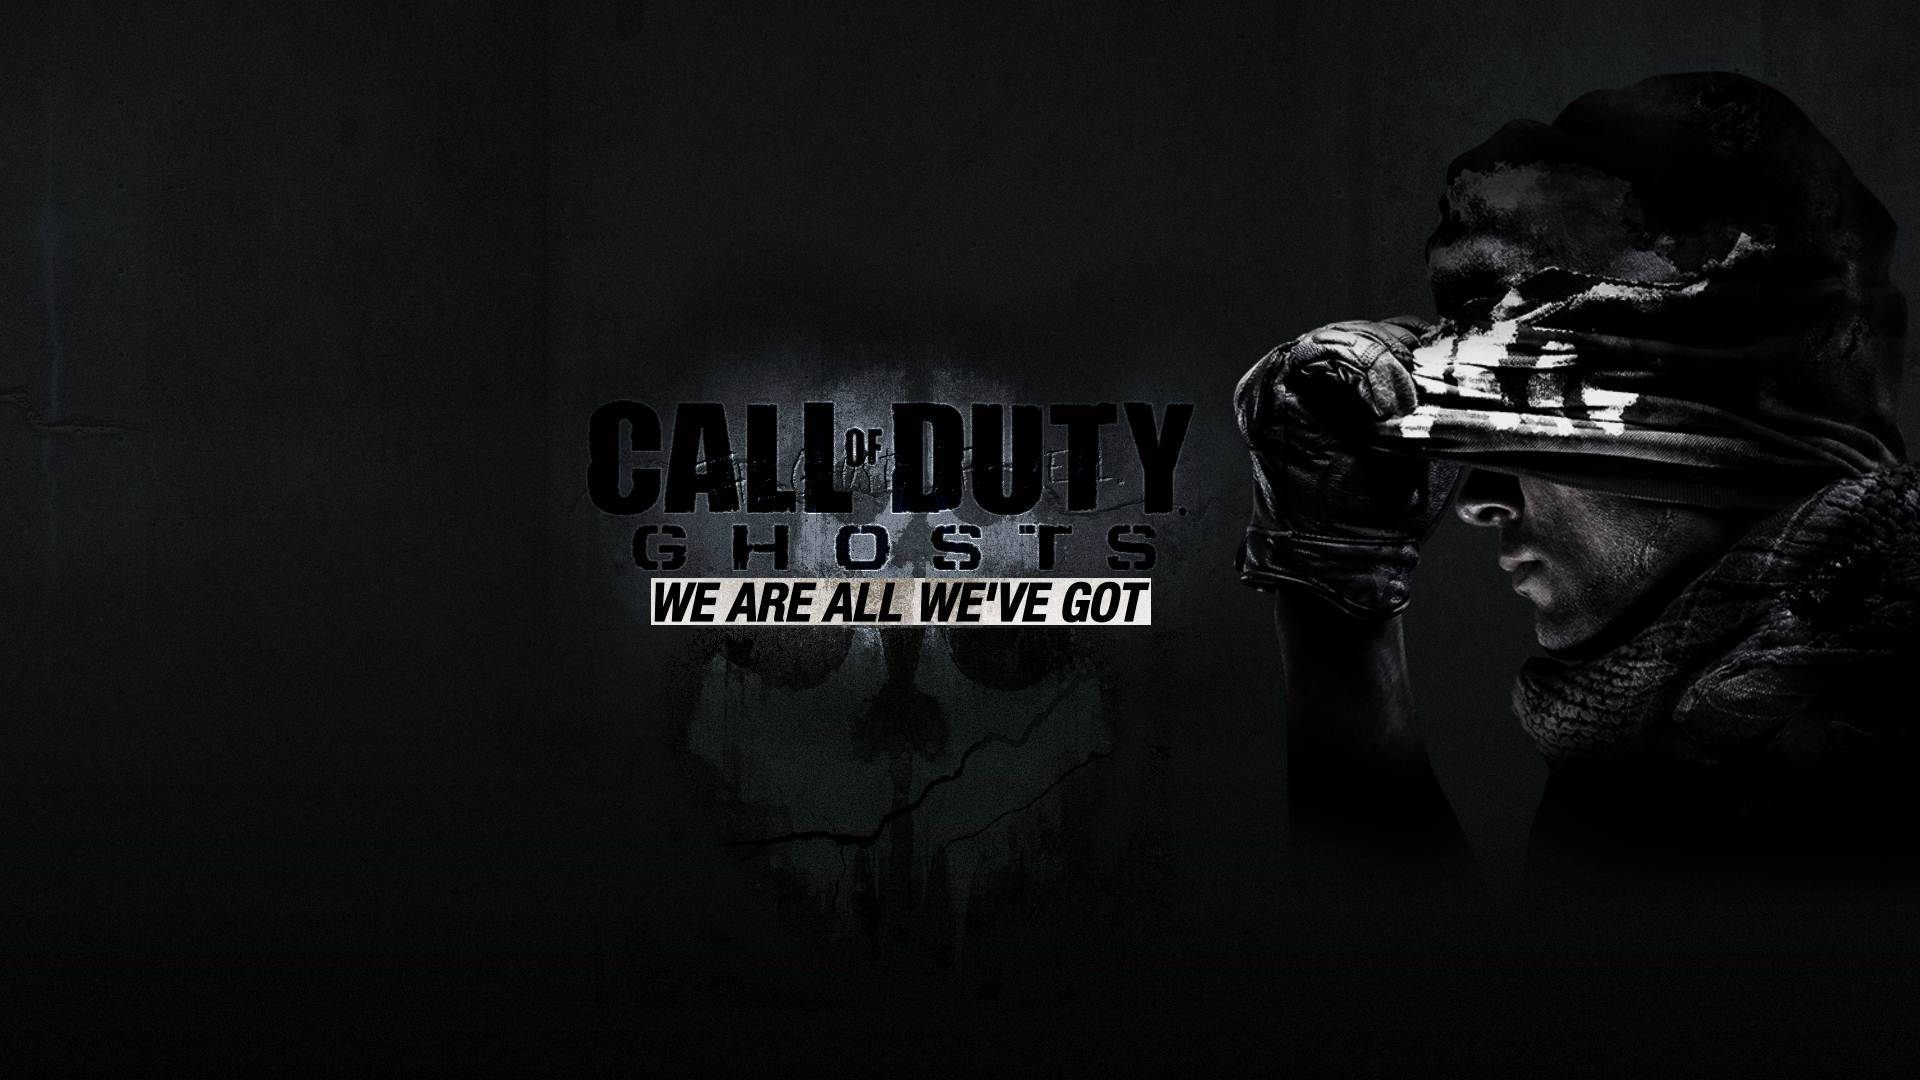 Call Of Duty Ghost With Slogan Wallpaper